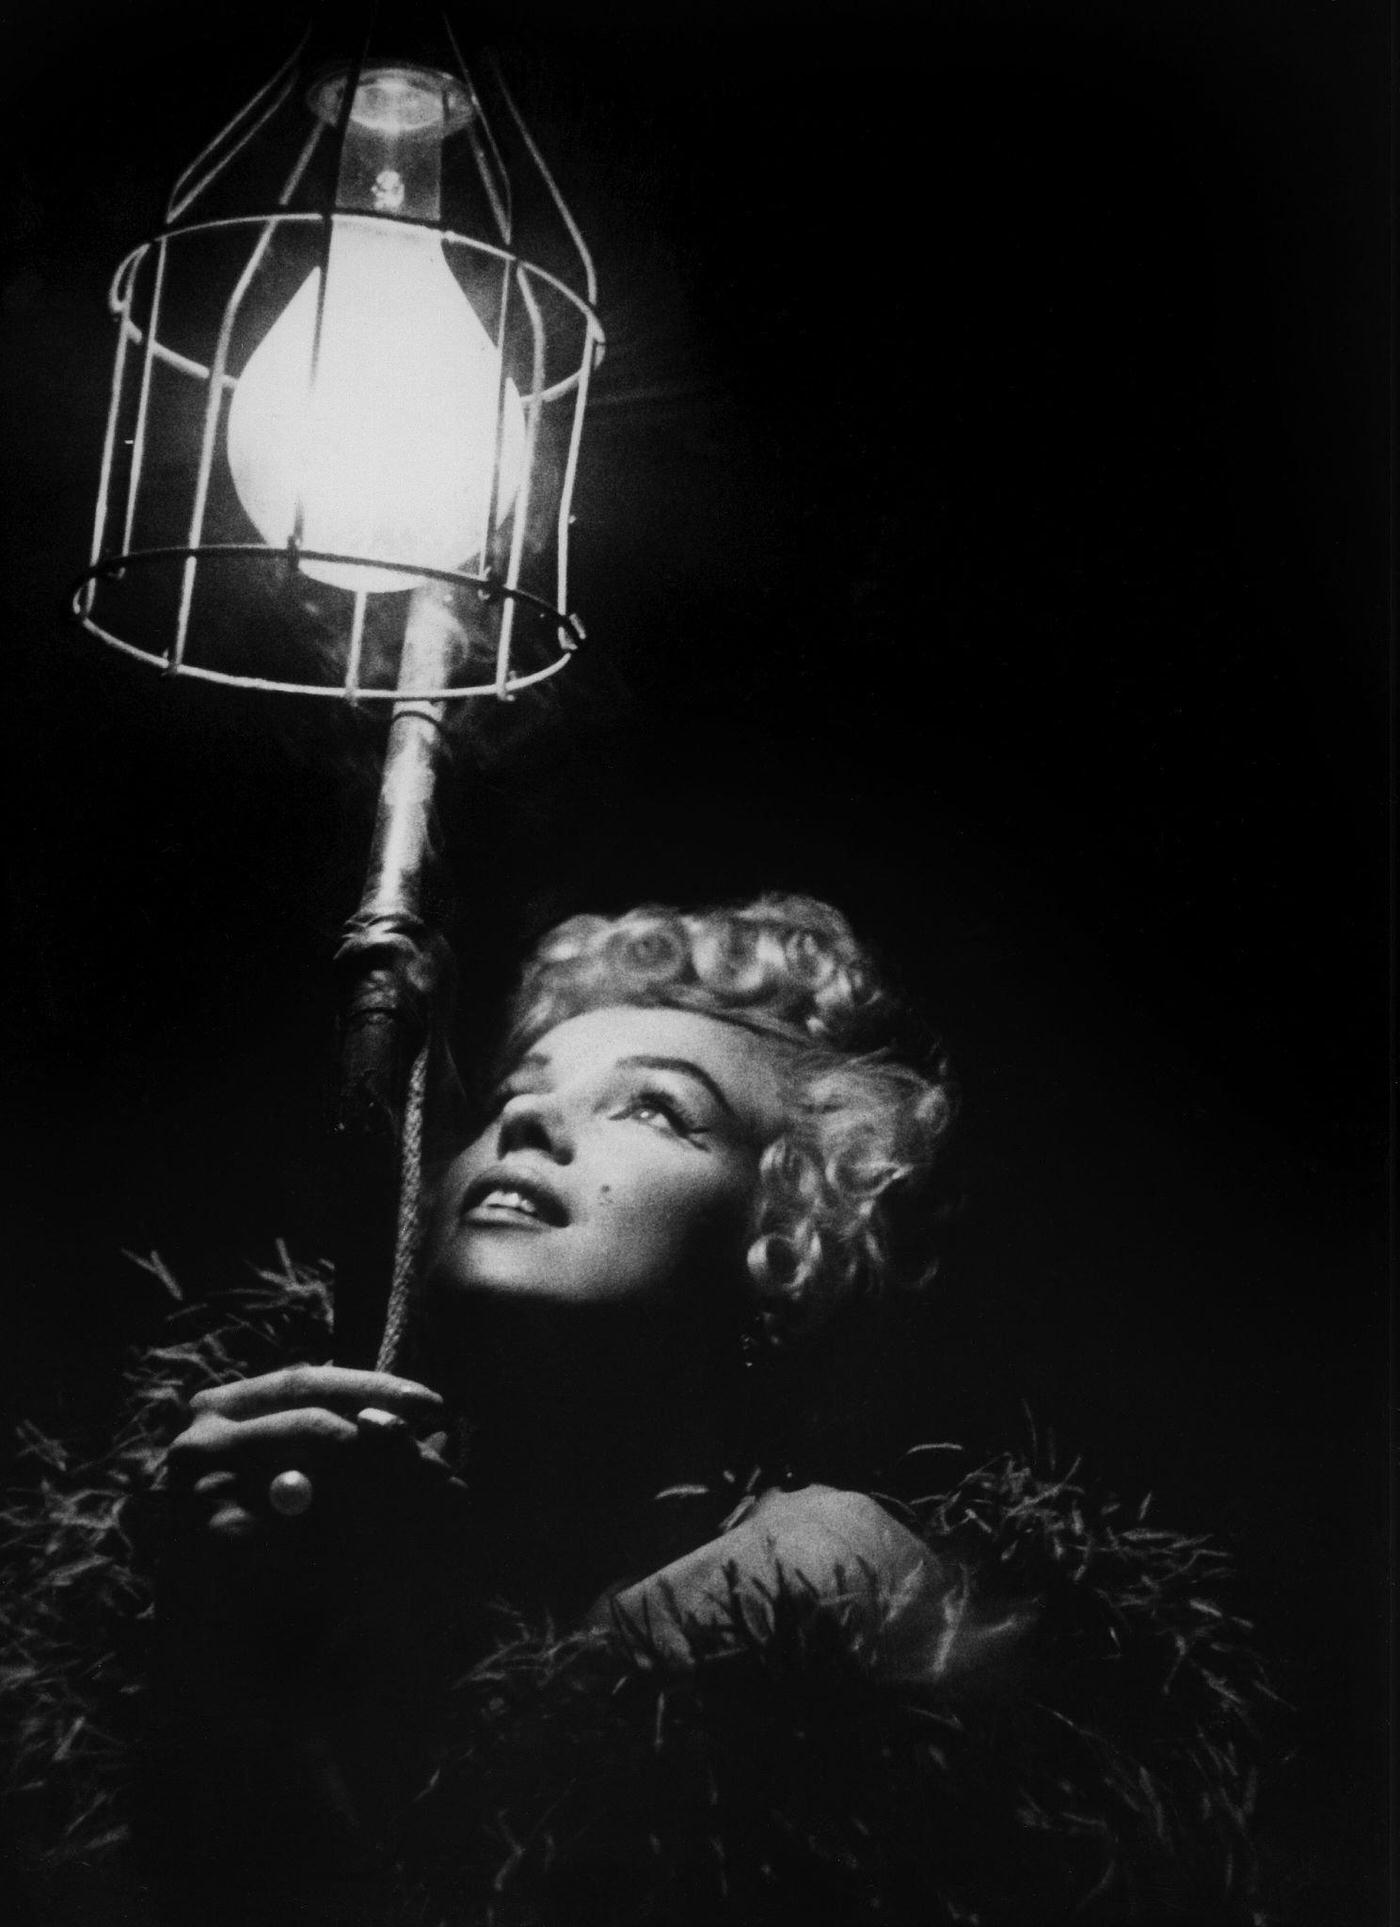 Marilyn Monroe wearing a feather boa looks up into a bright light in 1954 during the filming of "The Seven Year Itch"